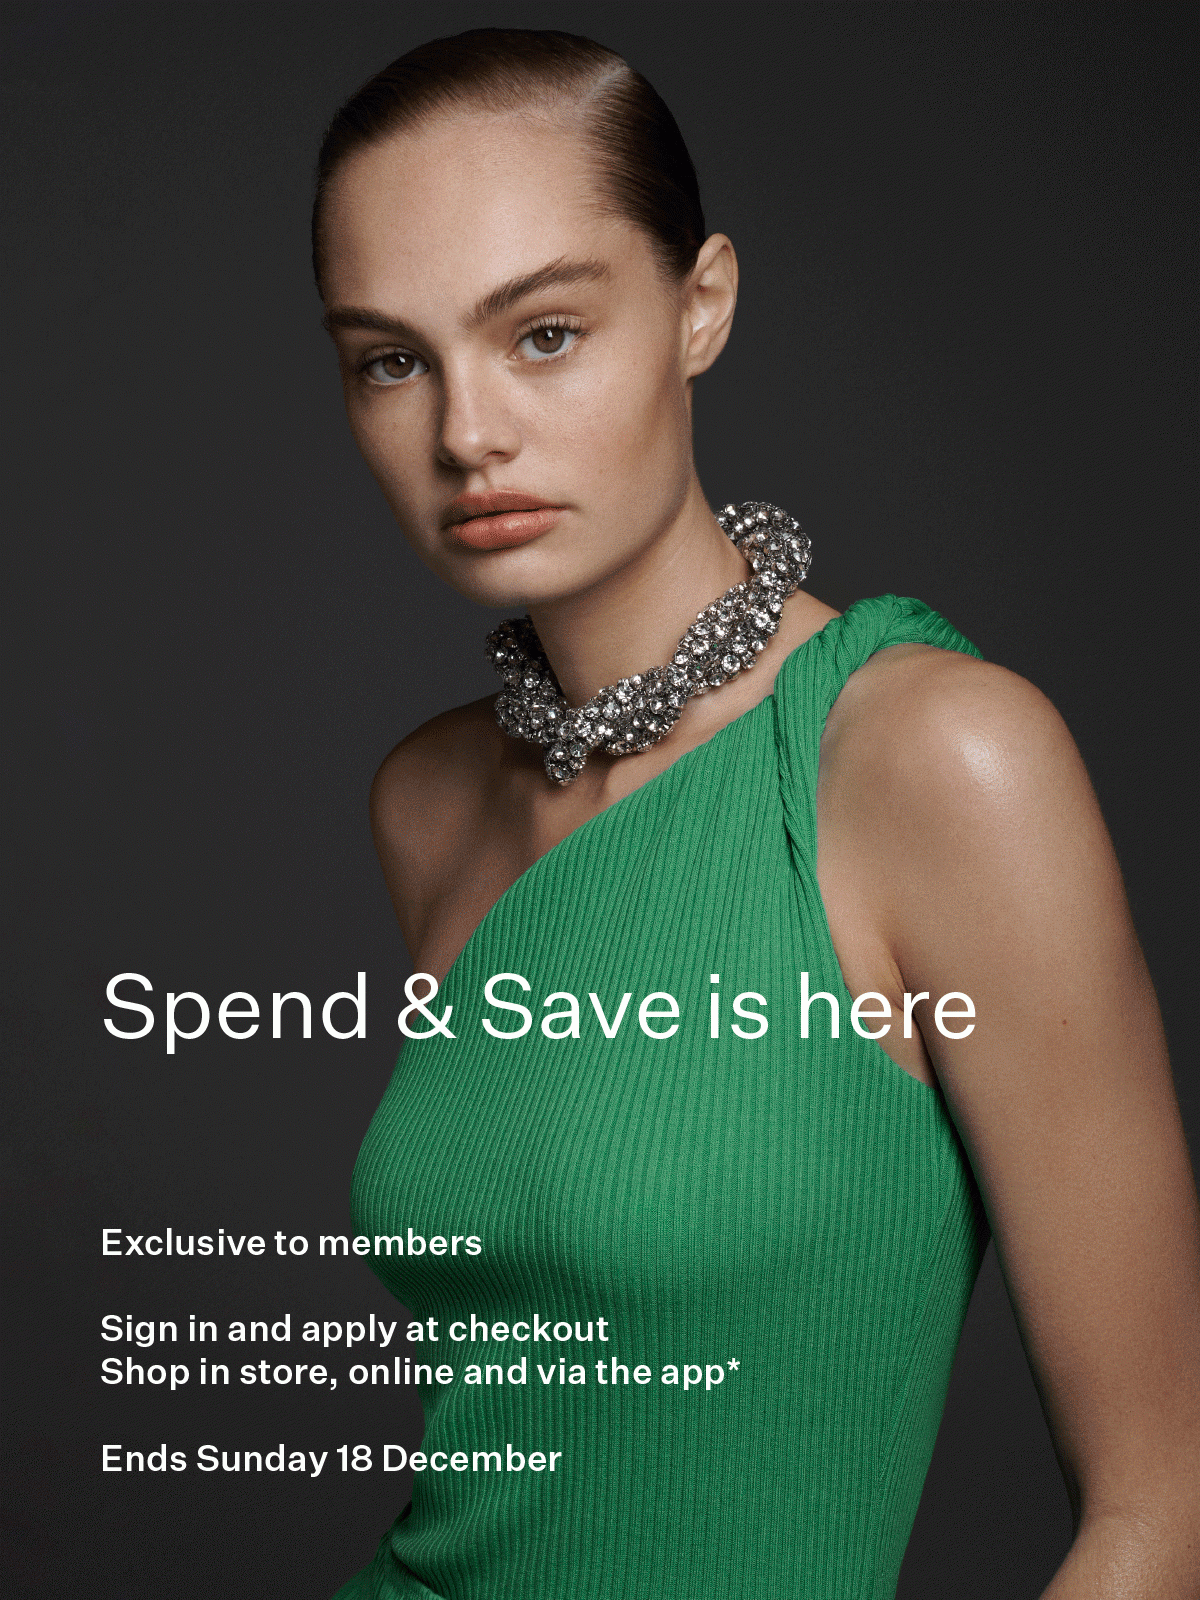 Spend & Save is here | Exclusive to members Sign in and apply at checkout Shop in store, online and via the app Ends Sunday 18 December